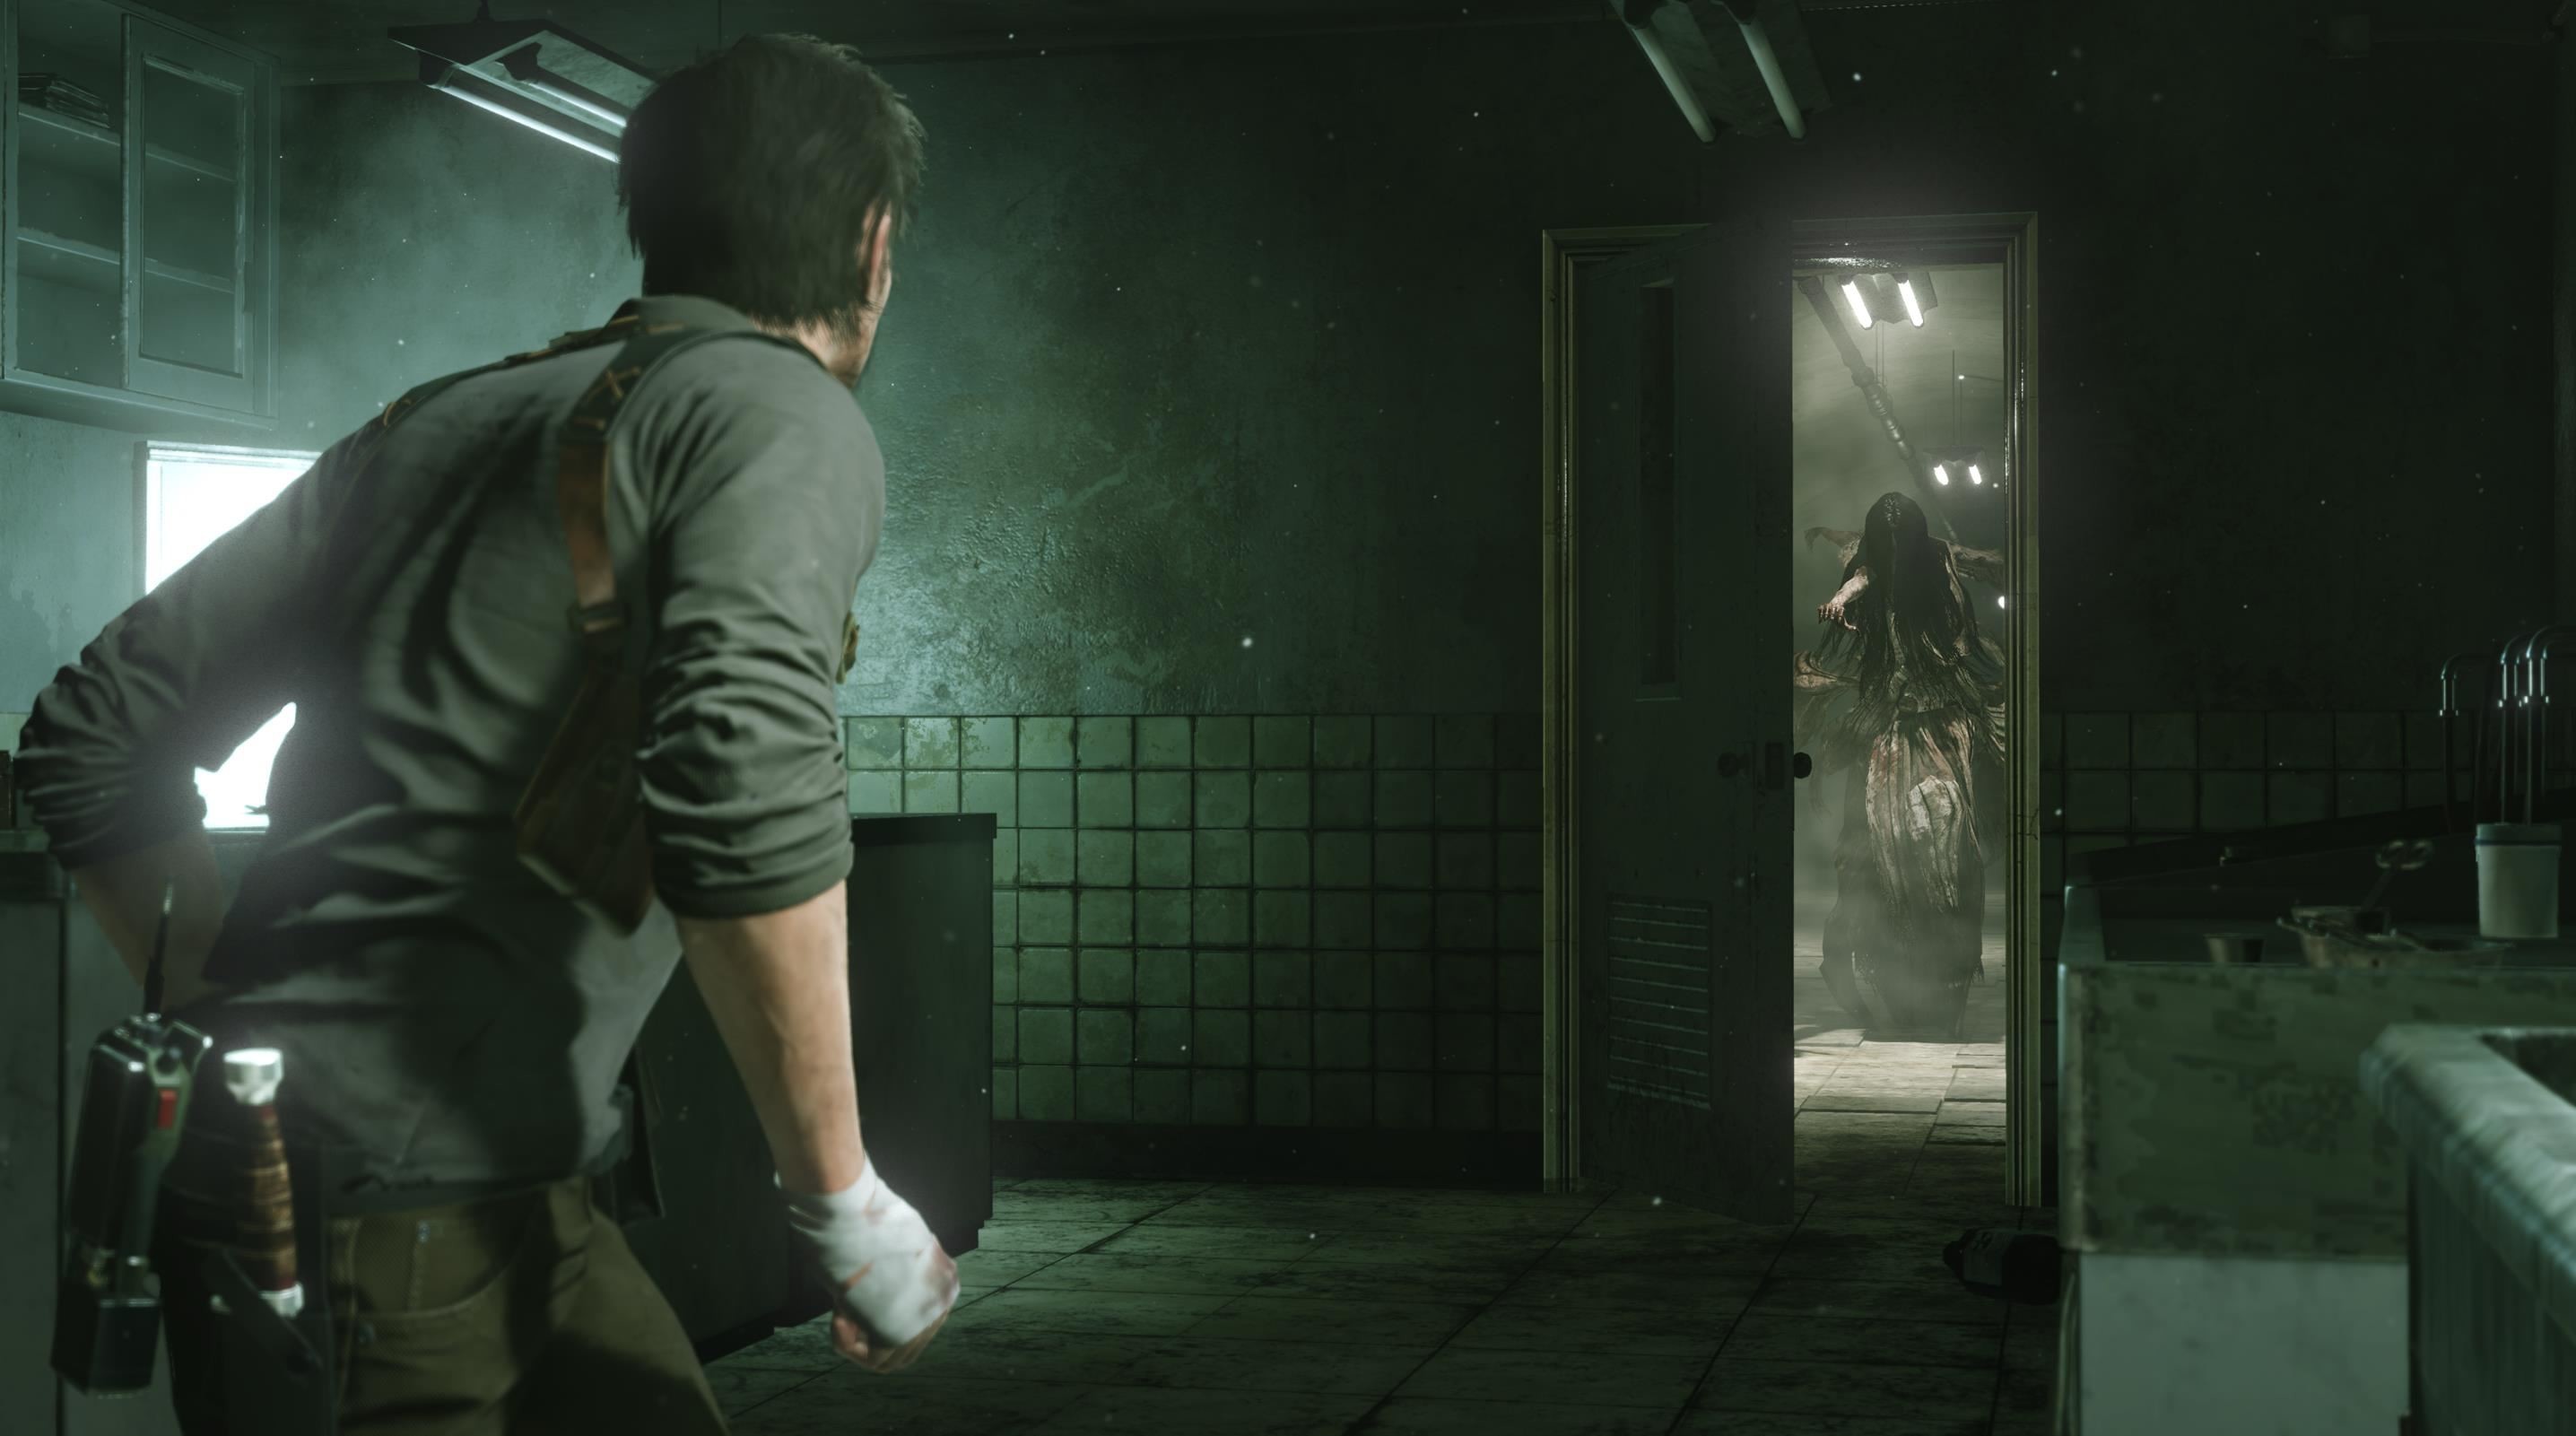 Скриншот *The Evil Within 2 [PS4] 5.05 / 6.72 / 7.02 [EUR] (2017) [Русский] (v1.04)*